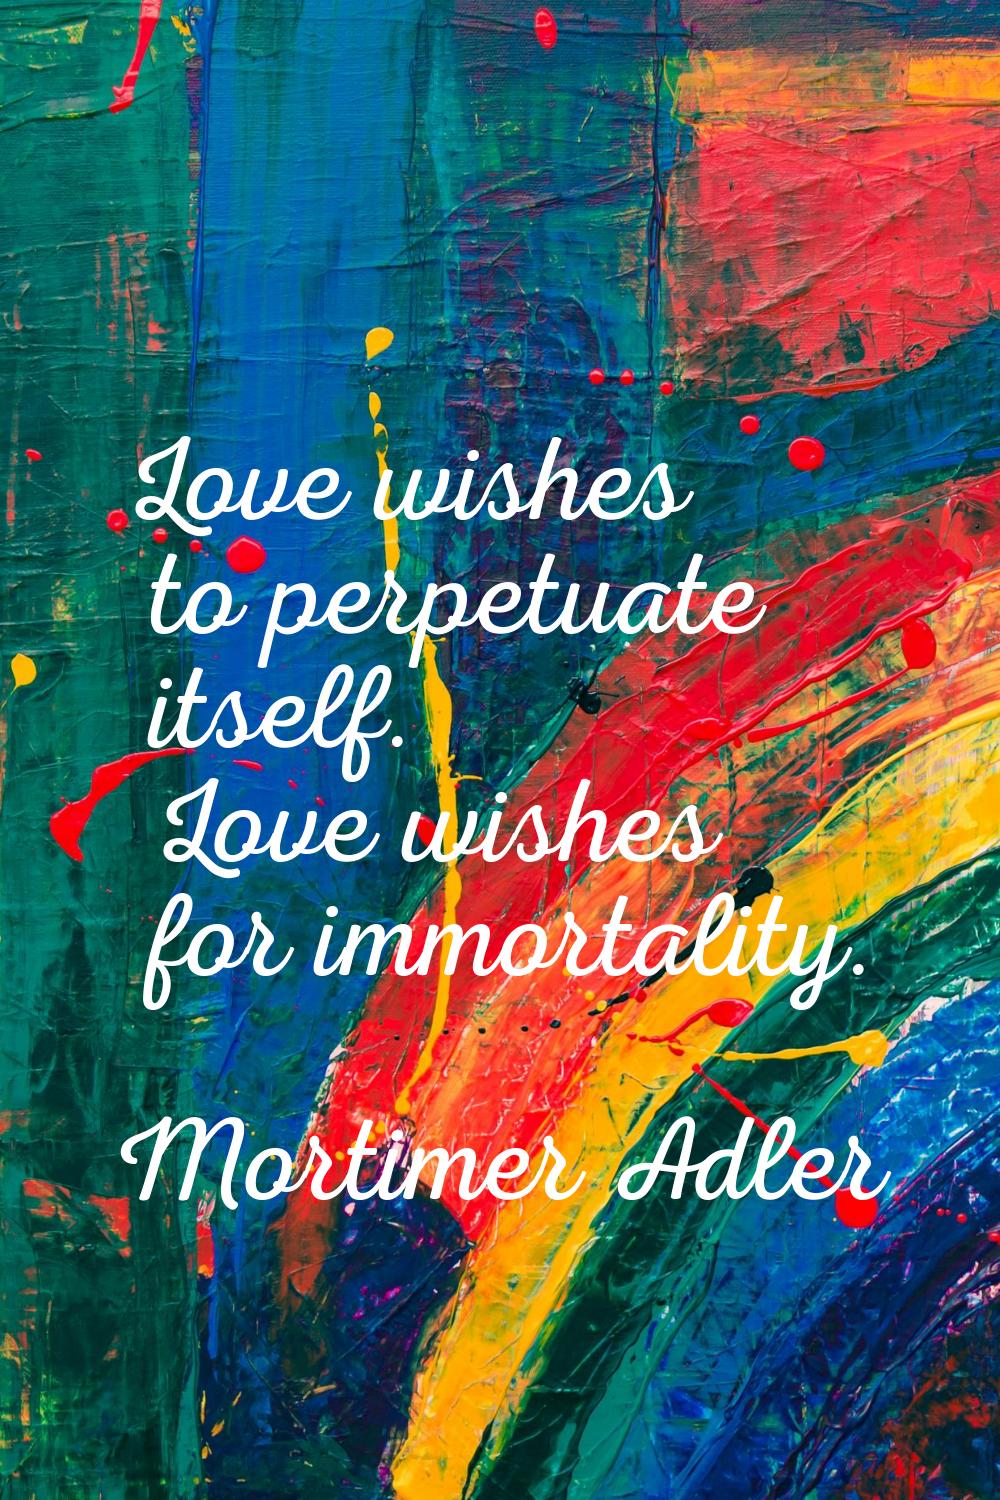 Love wishes to perpetuate itself. Love wishes for immortality.